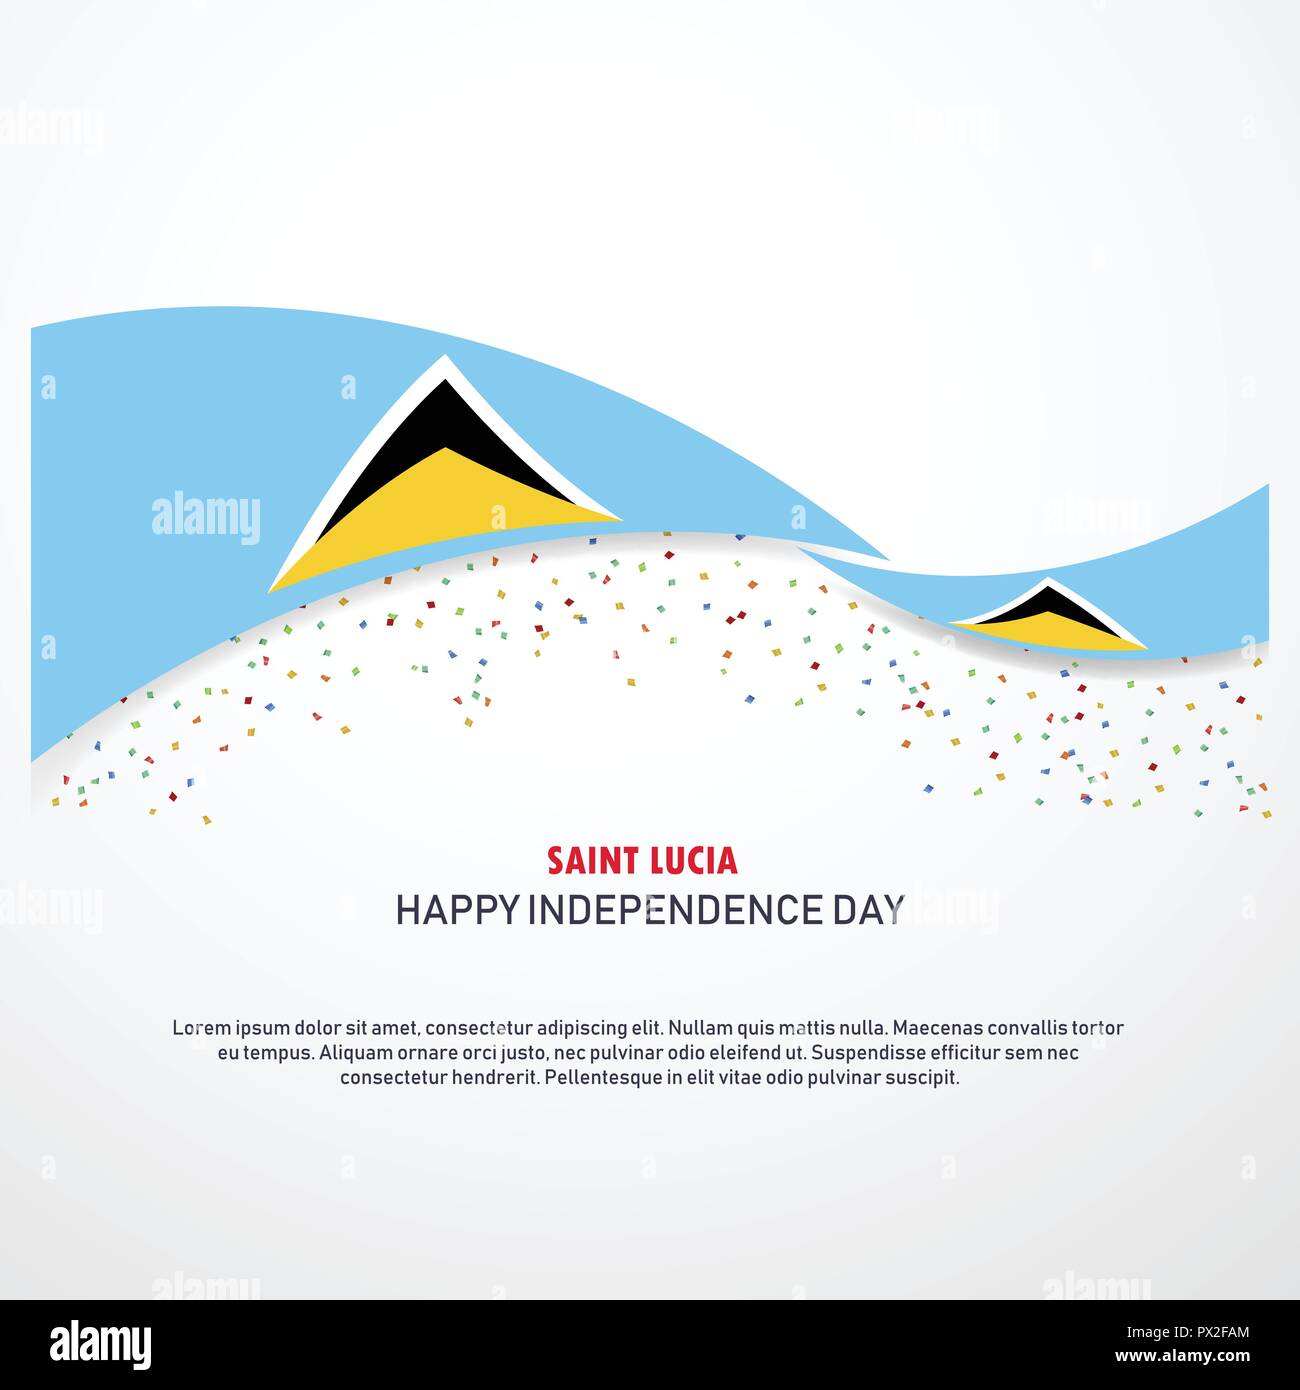 Saint Lucia Happy independence day Background Stock Vector